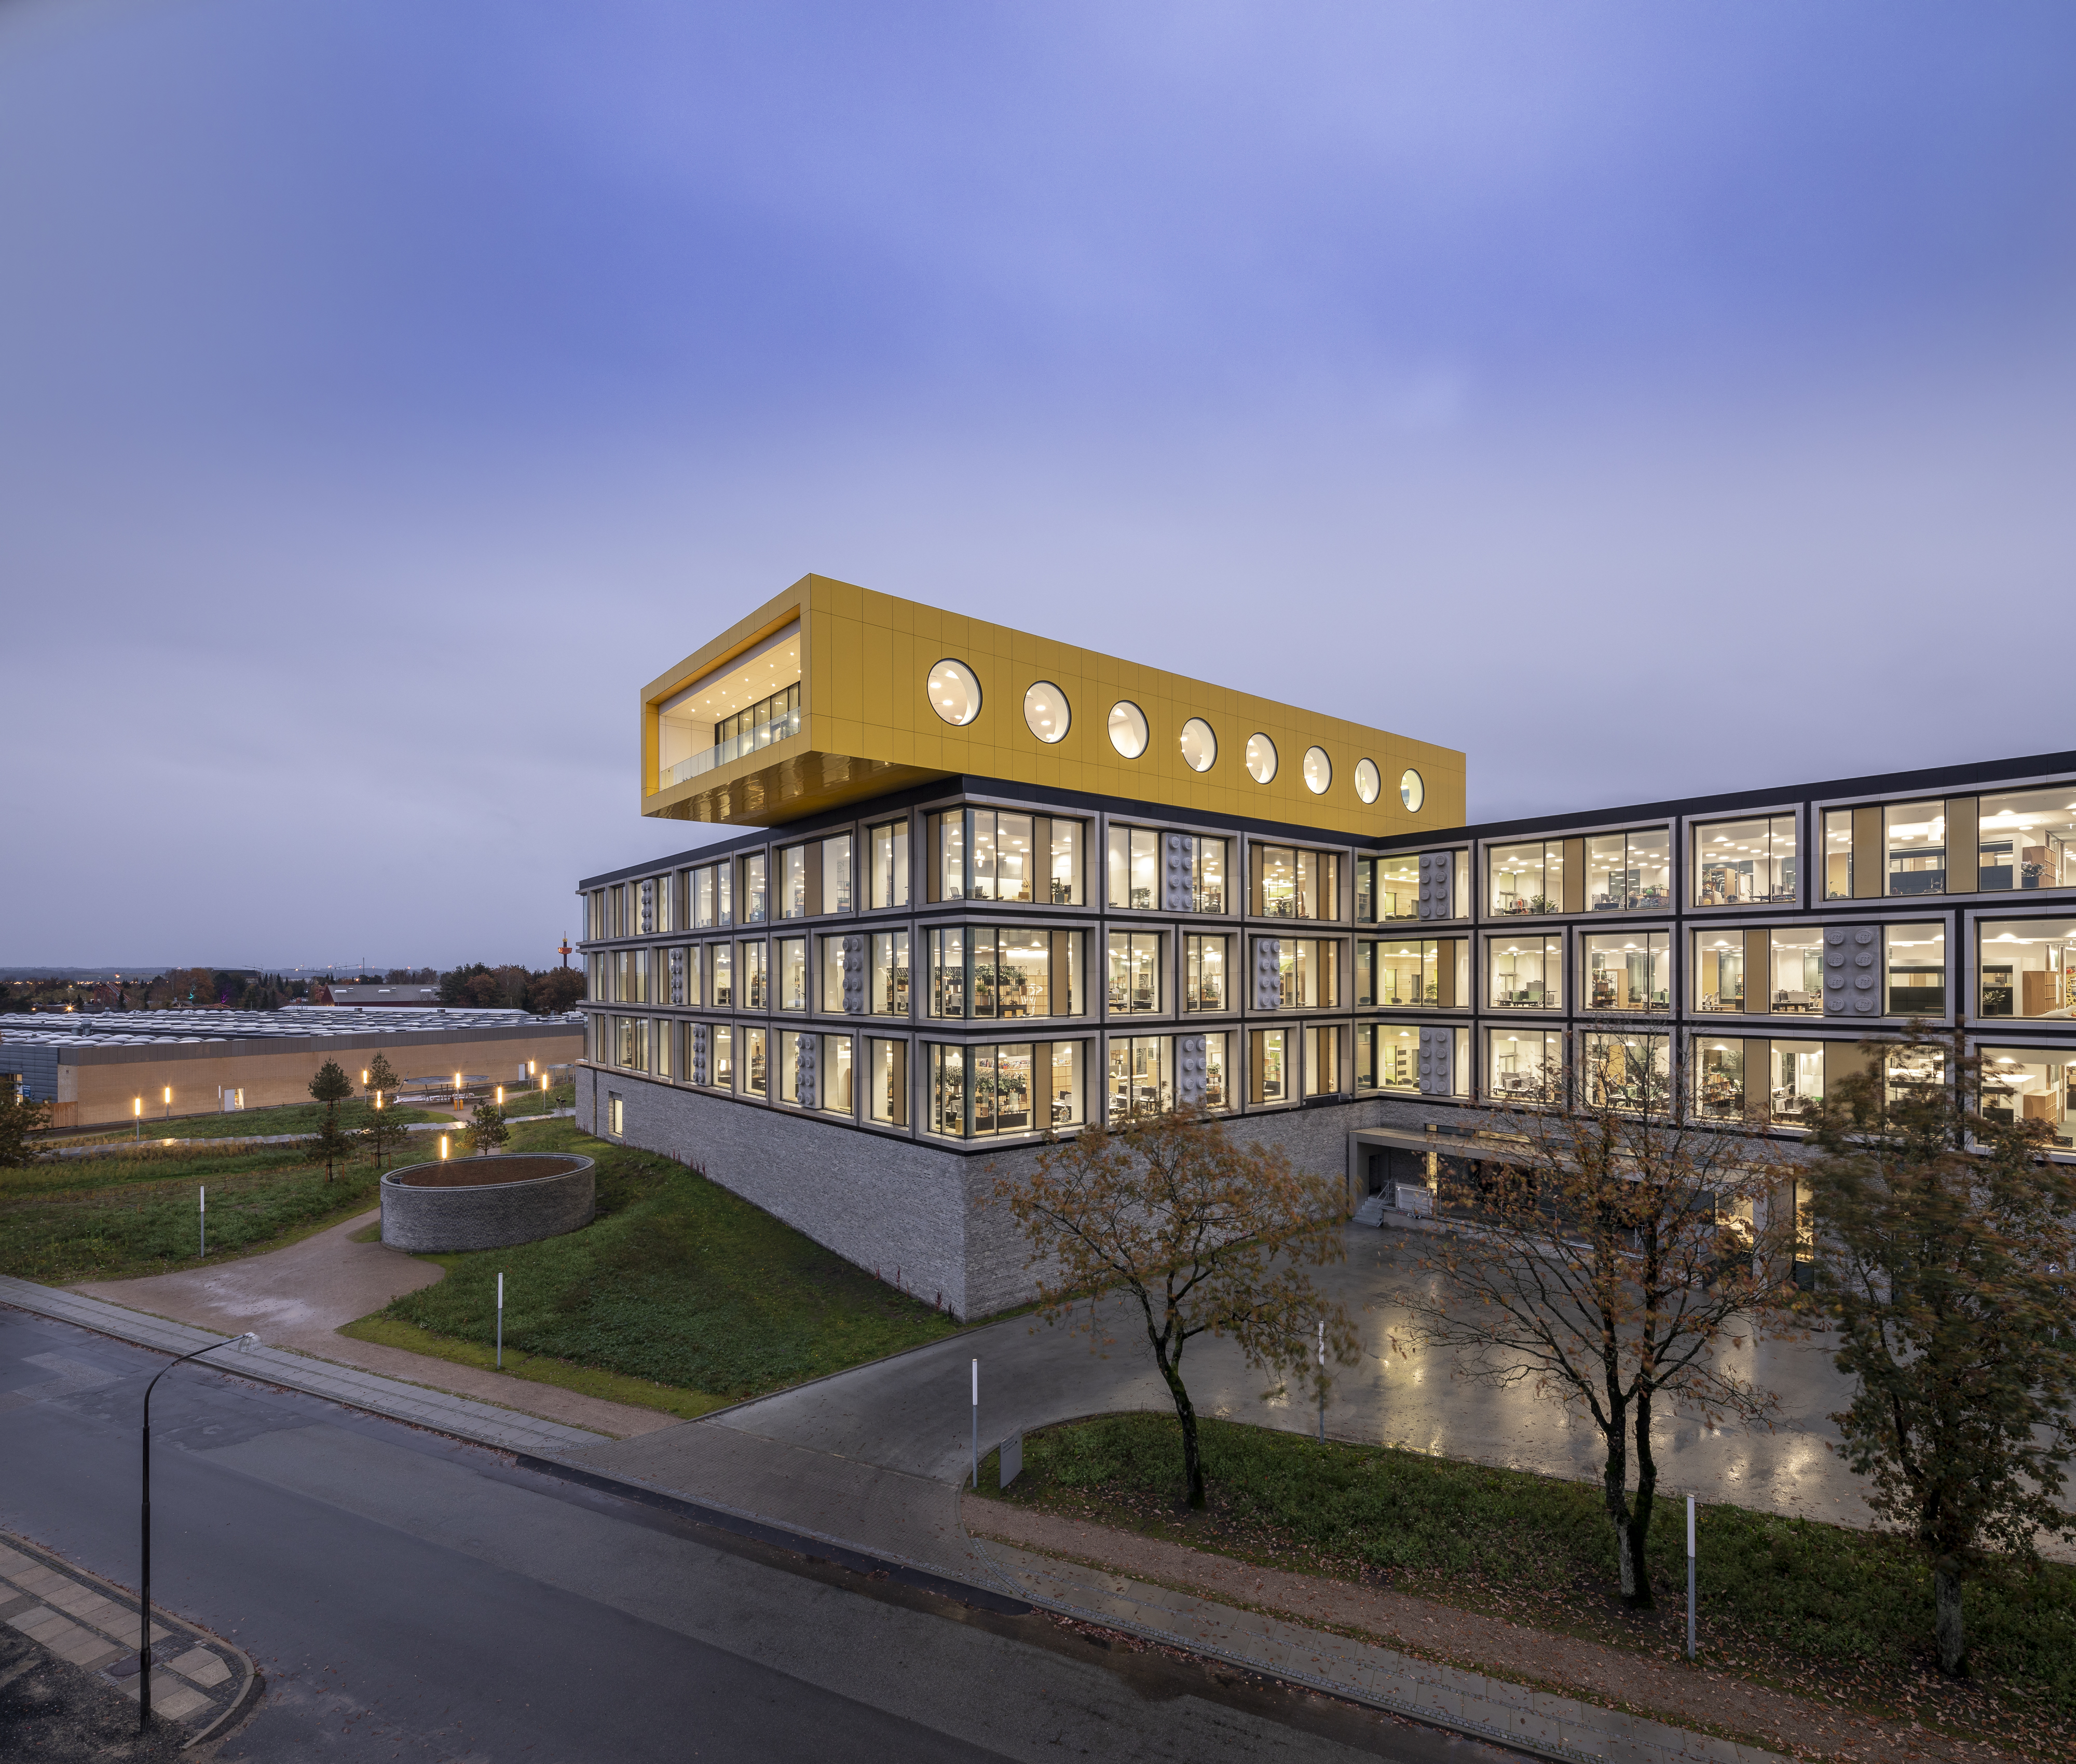 Hates overfladisk rester The LEGO Group Opens New Campus in Billund, Denmark - The Brick Fan